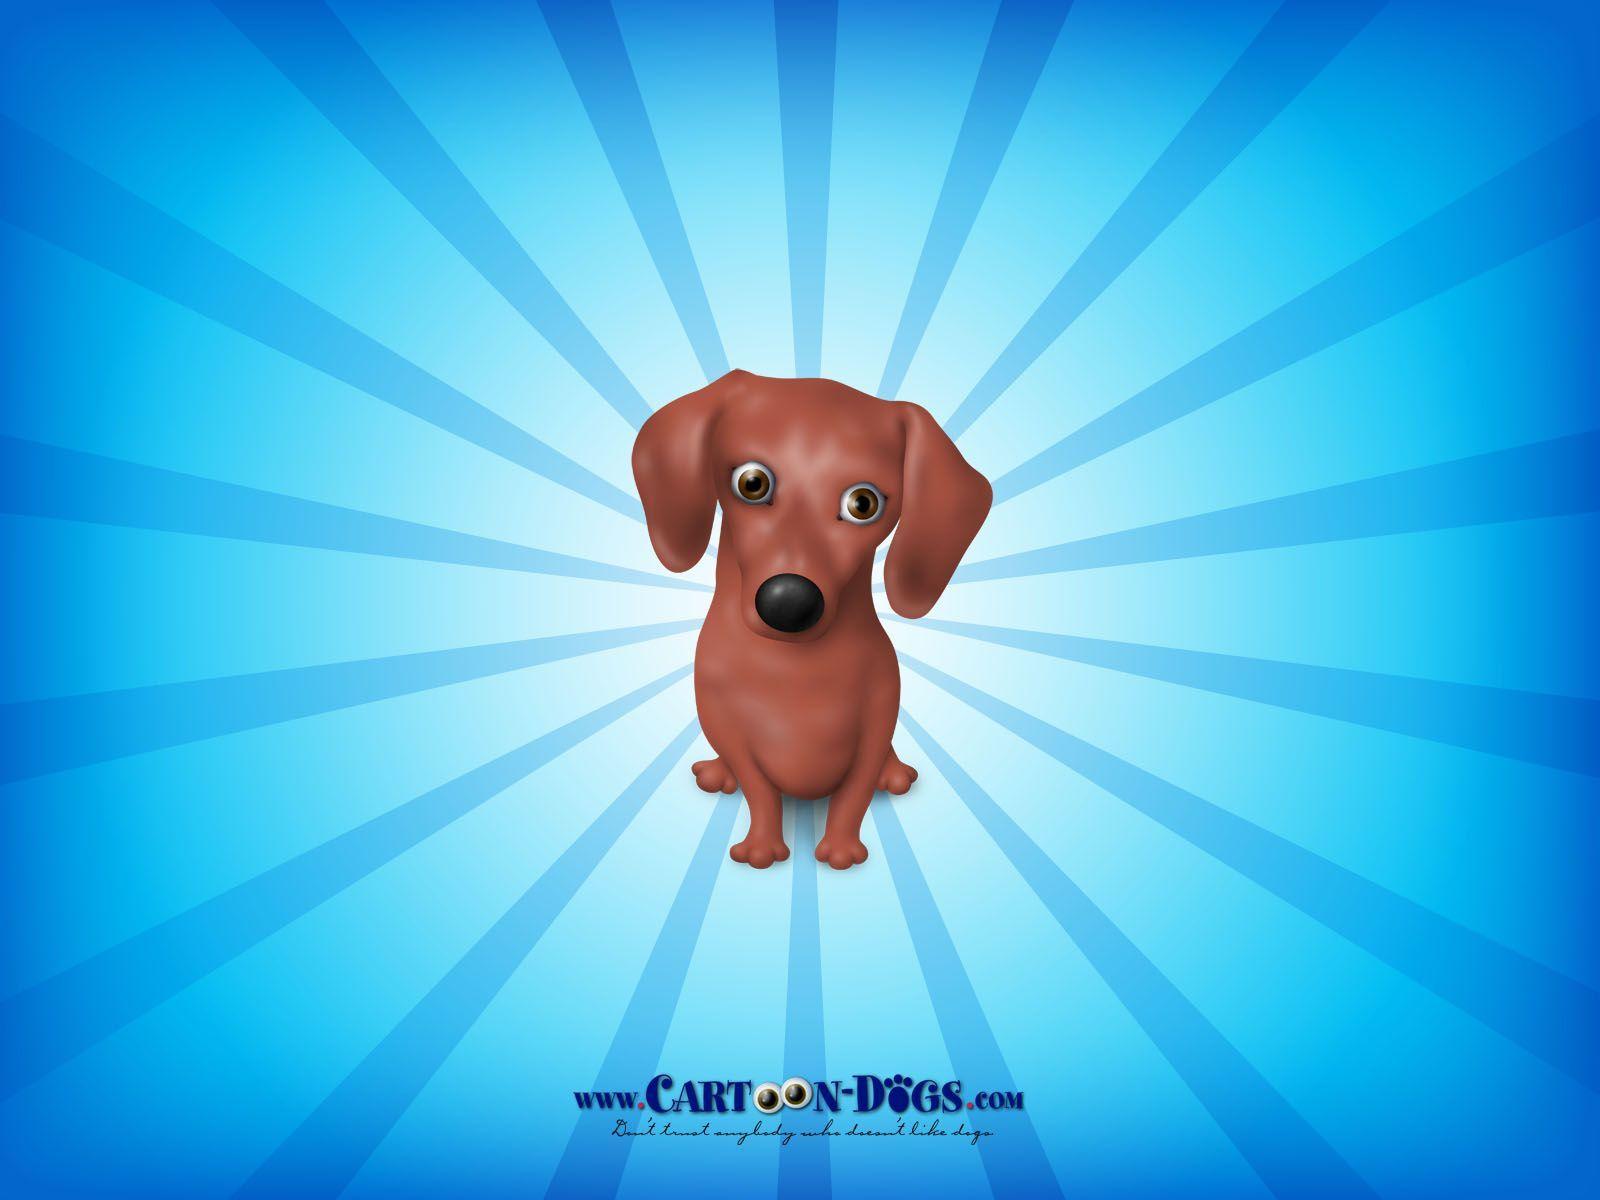 Dachshund by Cartoon Dogs: Free downloads avatars, icons